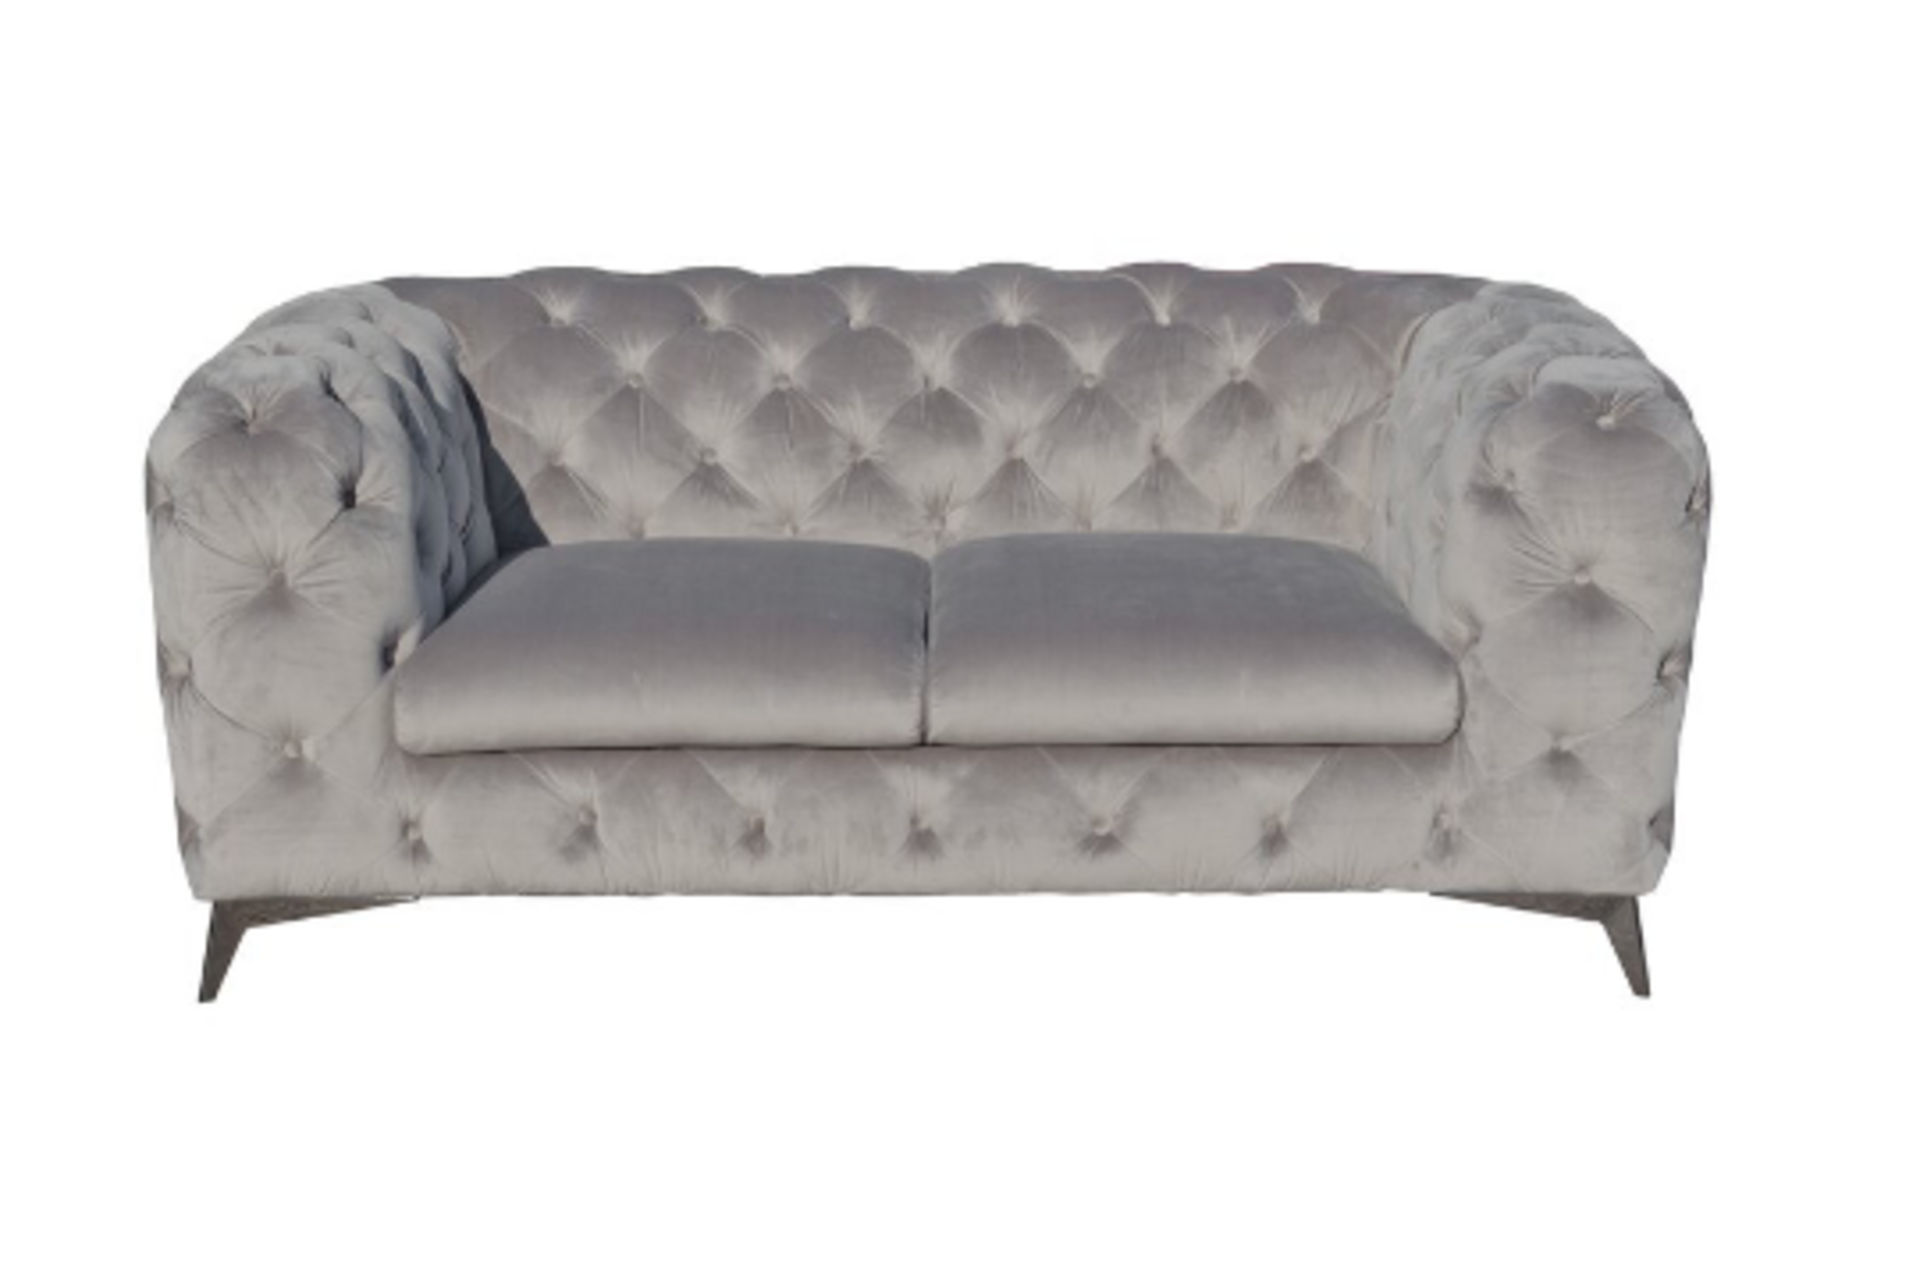 Plush Velvet Chesterfield 2 Seater Sofa Luxurious Couch Silver Grey Wayfair, Appears New